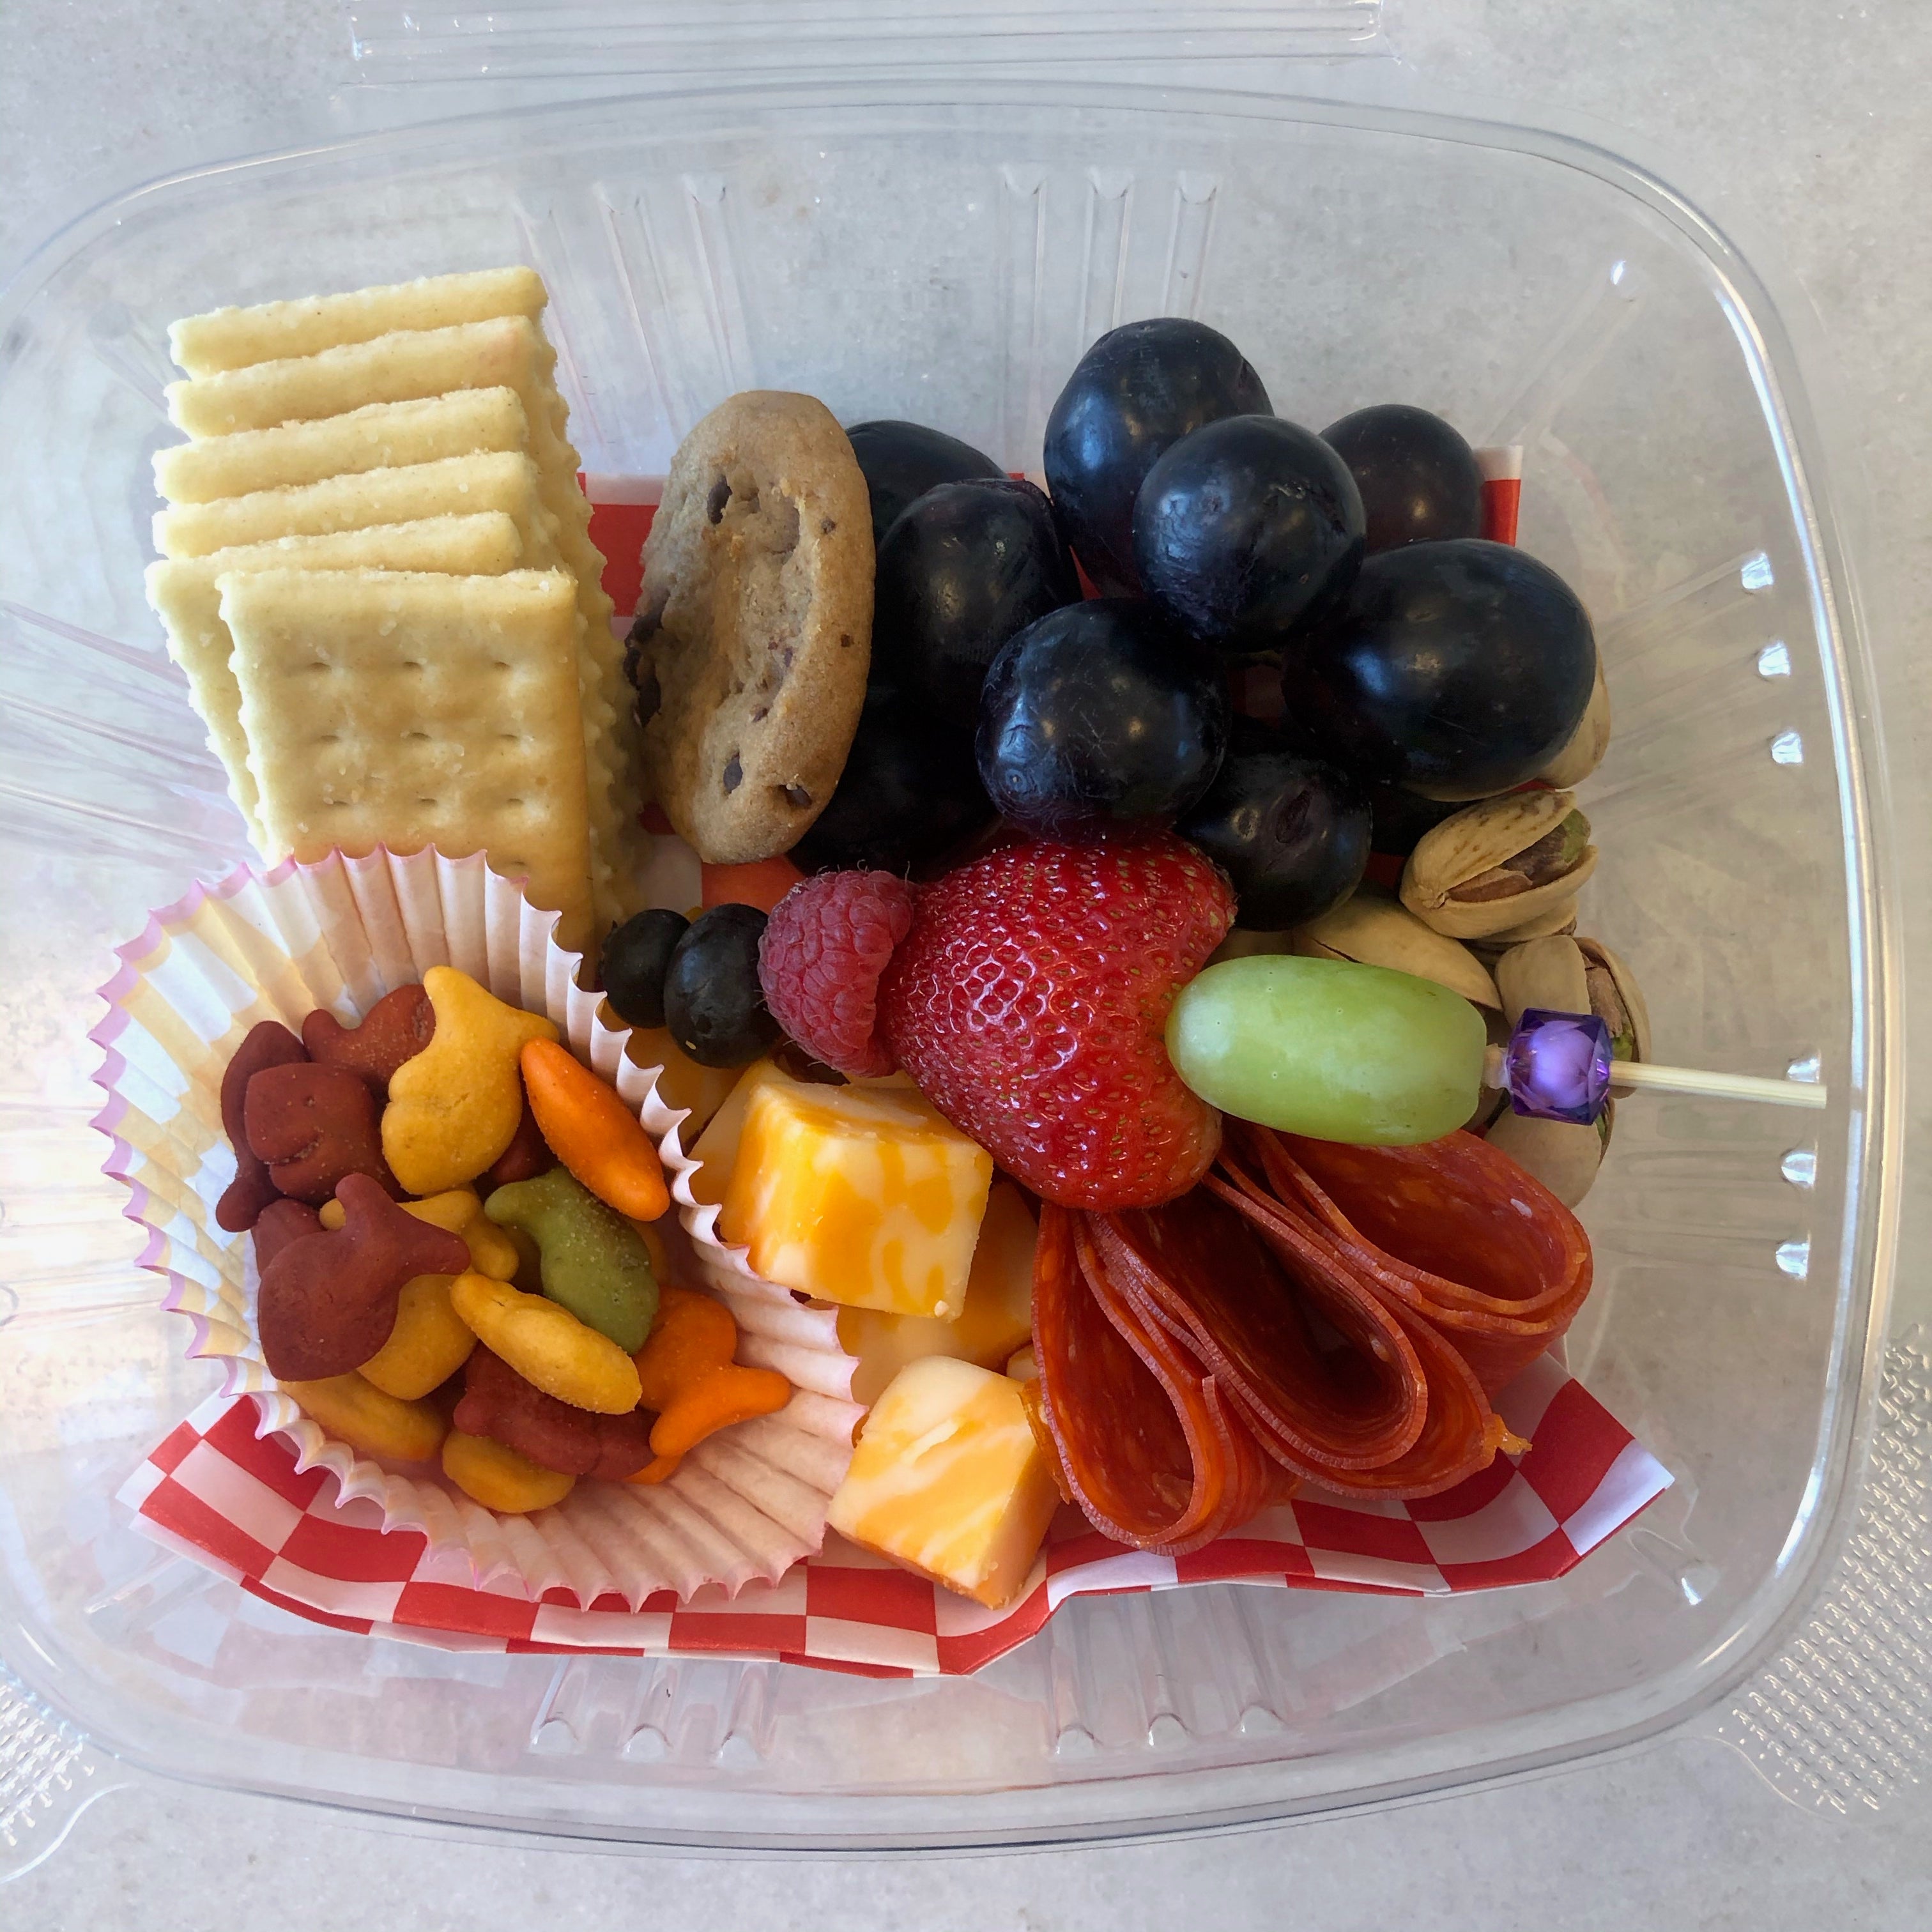 Charcuterie-inspired school lunch ideas for kids and teens